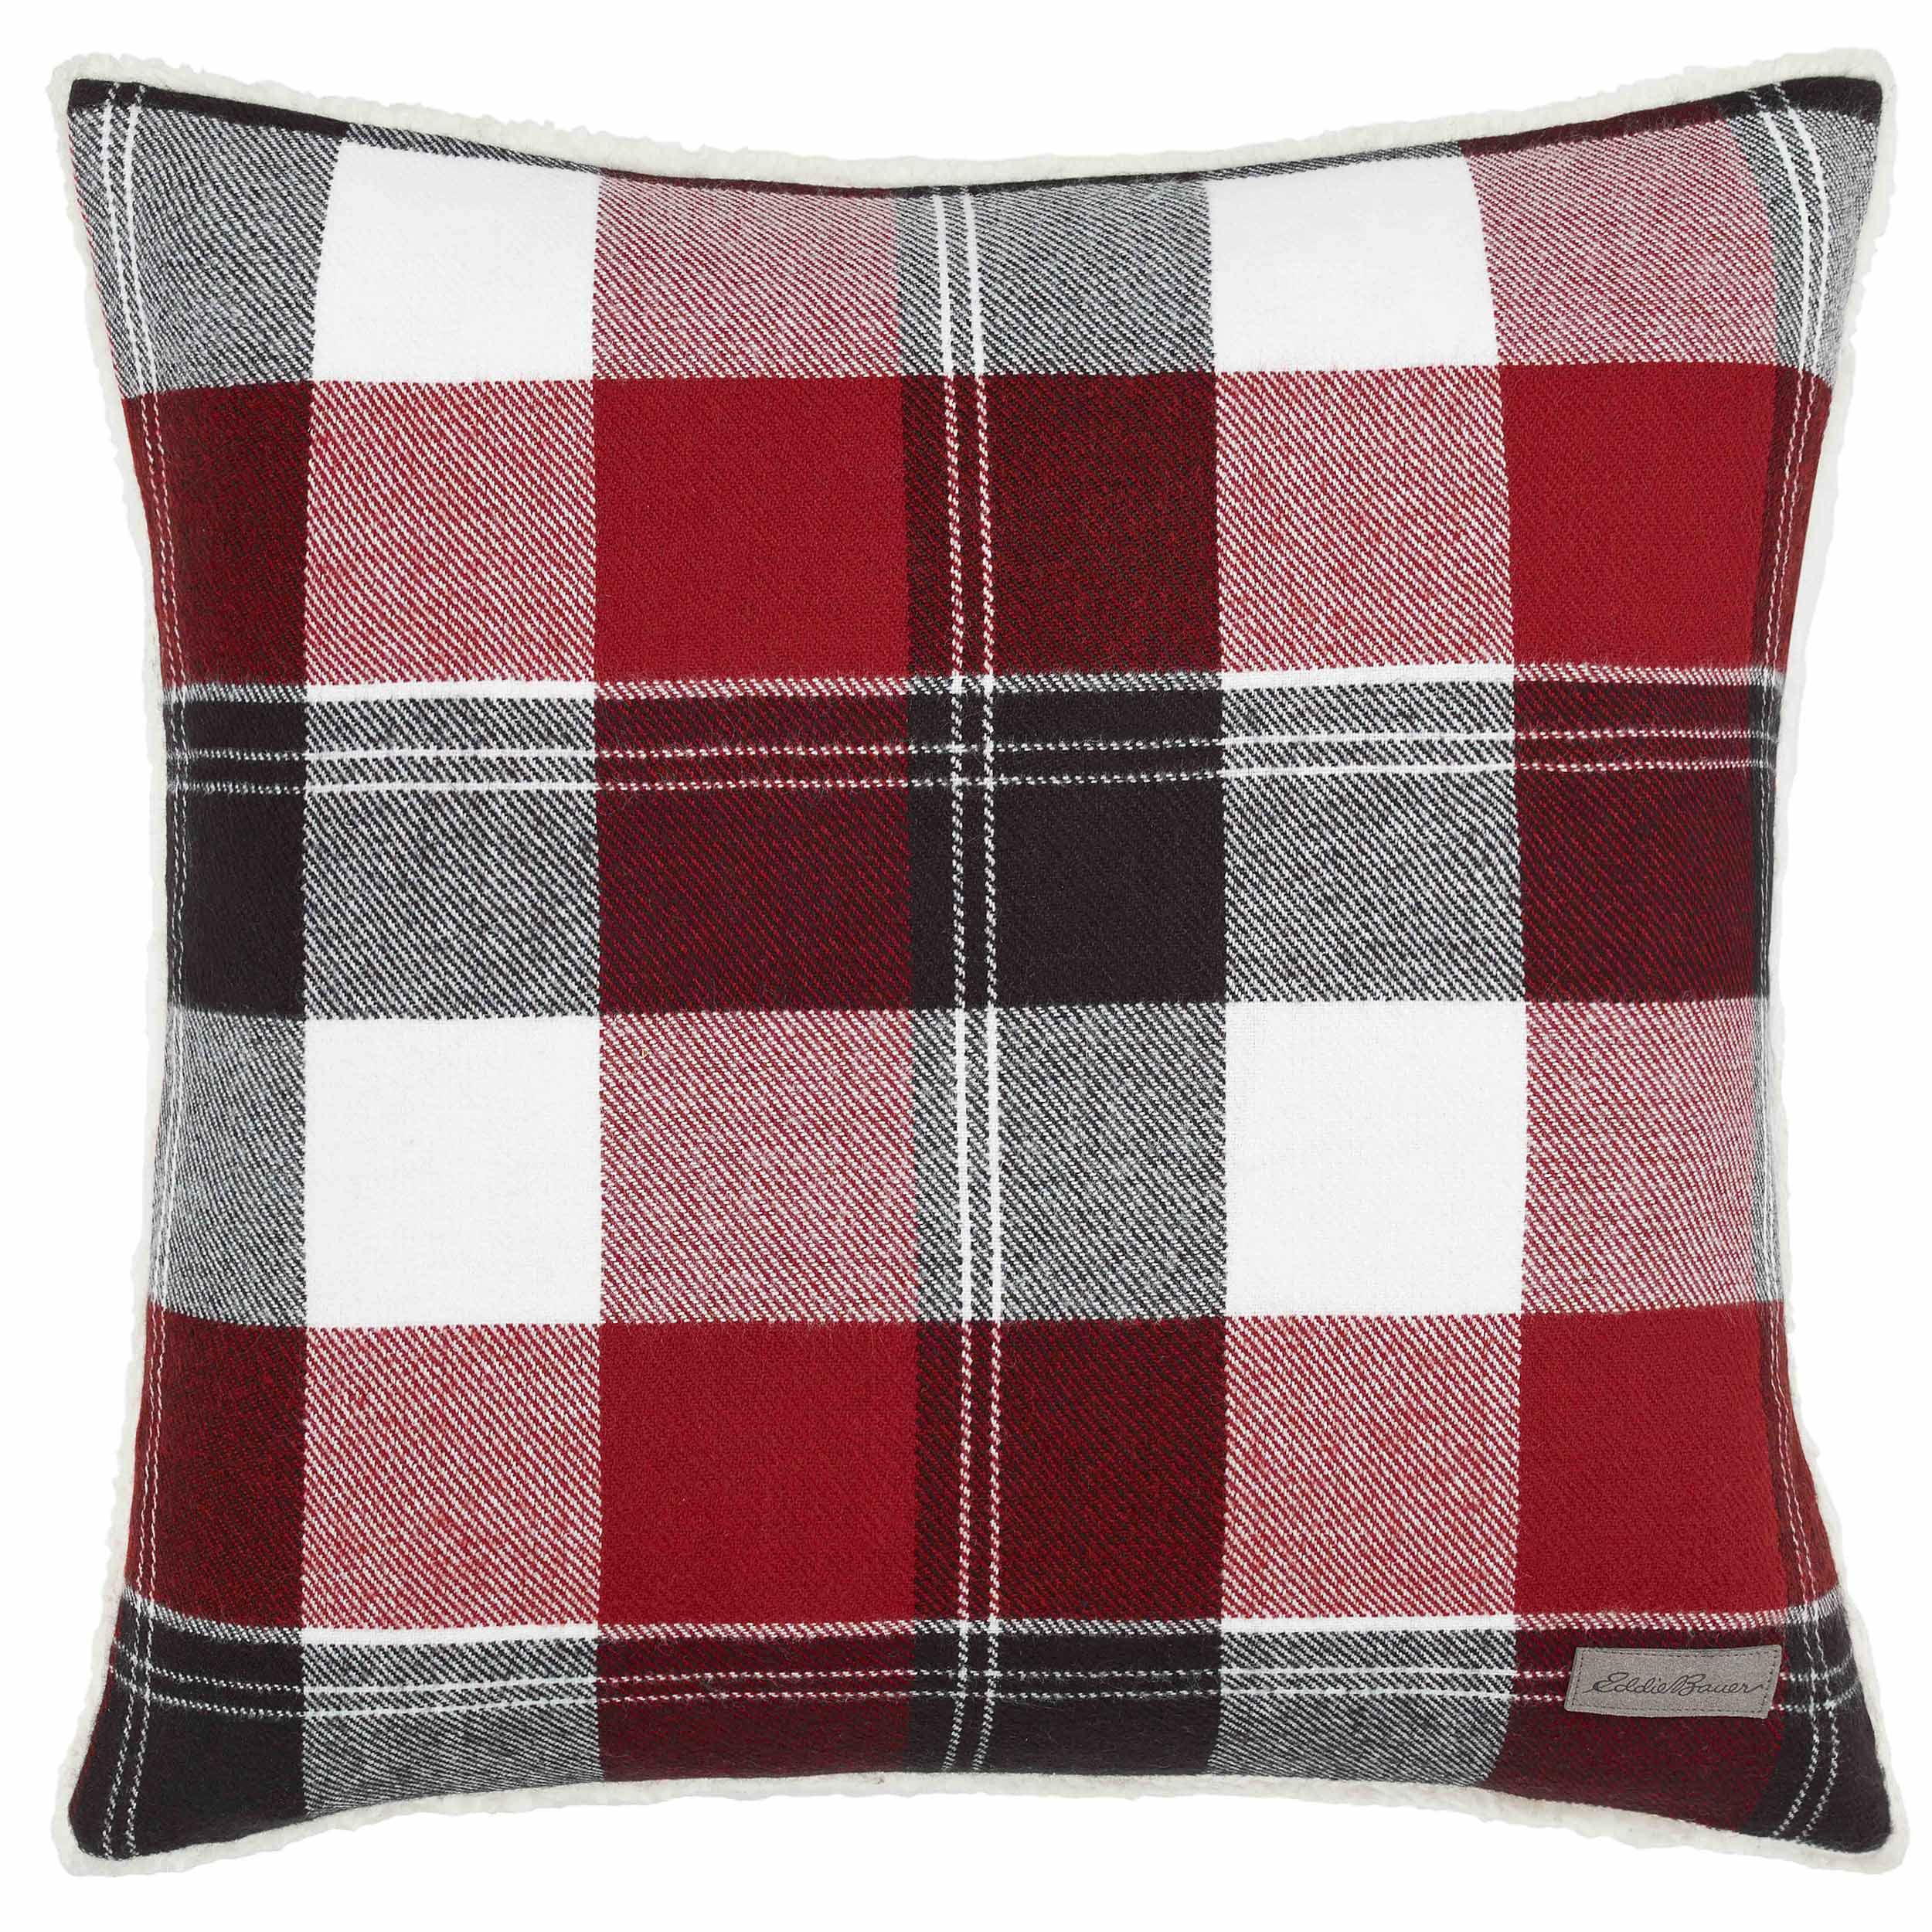 Book Cover Eddie Bauer | Lodge Collection | Super Soft and Cozy Classic Plaid Design Decorative Throw Pillow/Sham, Easy Care Machine Washable, 20